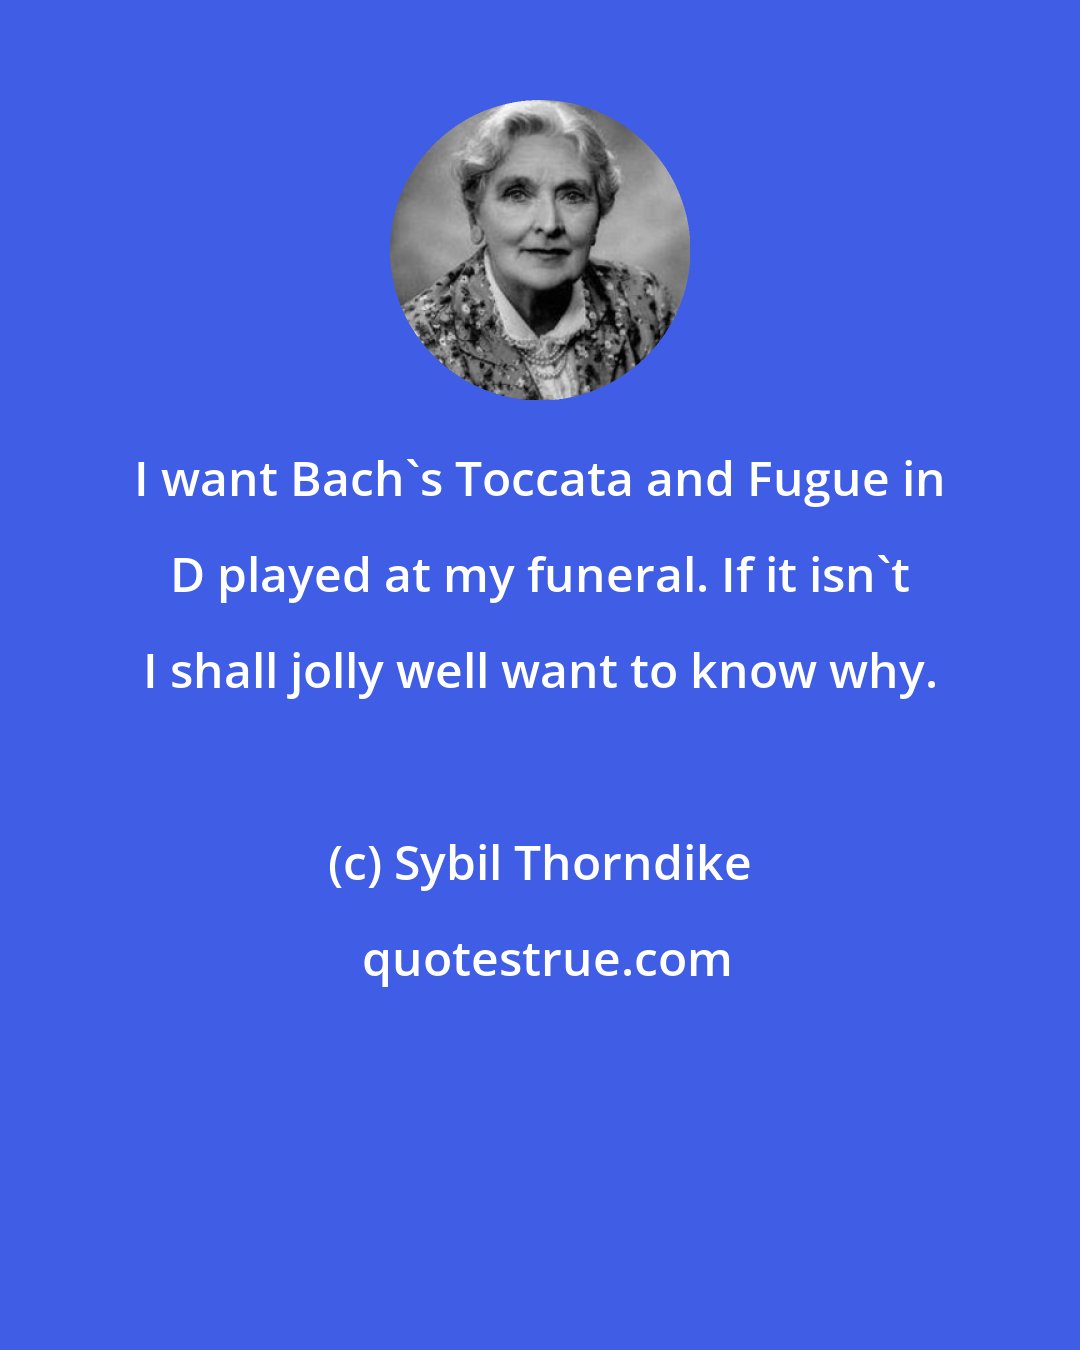 Sybil Thorndike: I want Bach's Toccata and Fugue in D played at my funeral. If it isn't I shall jolly well want to know why.